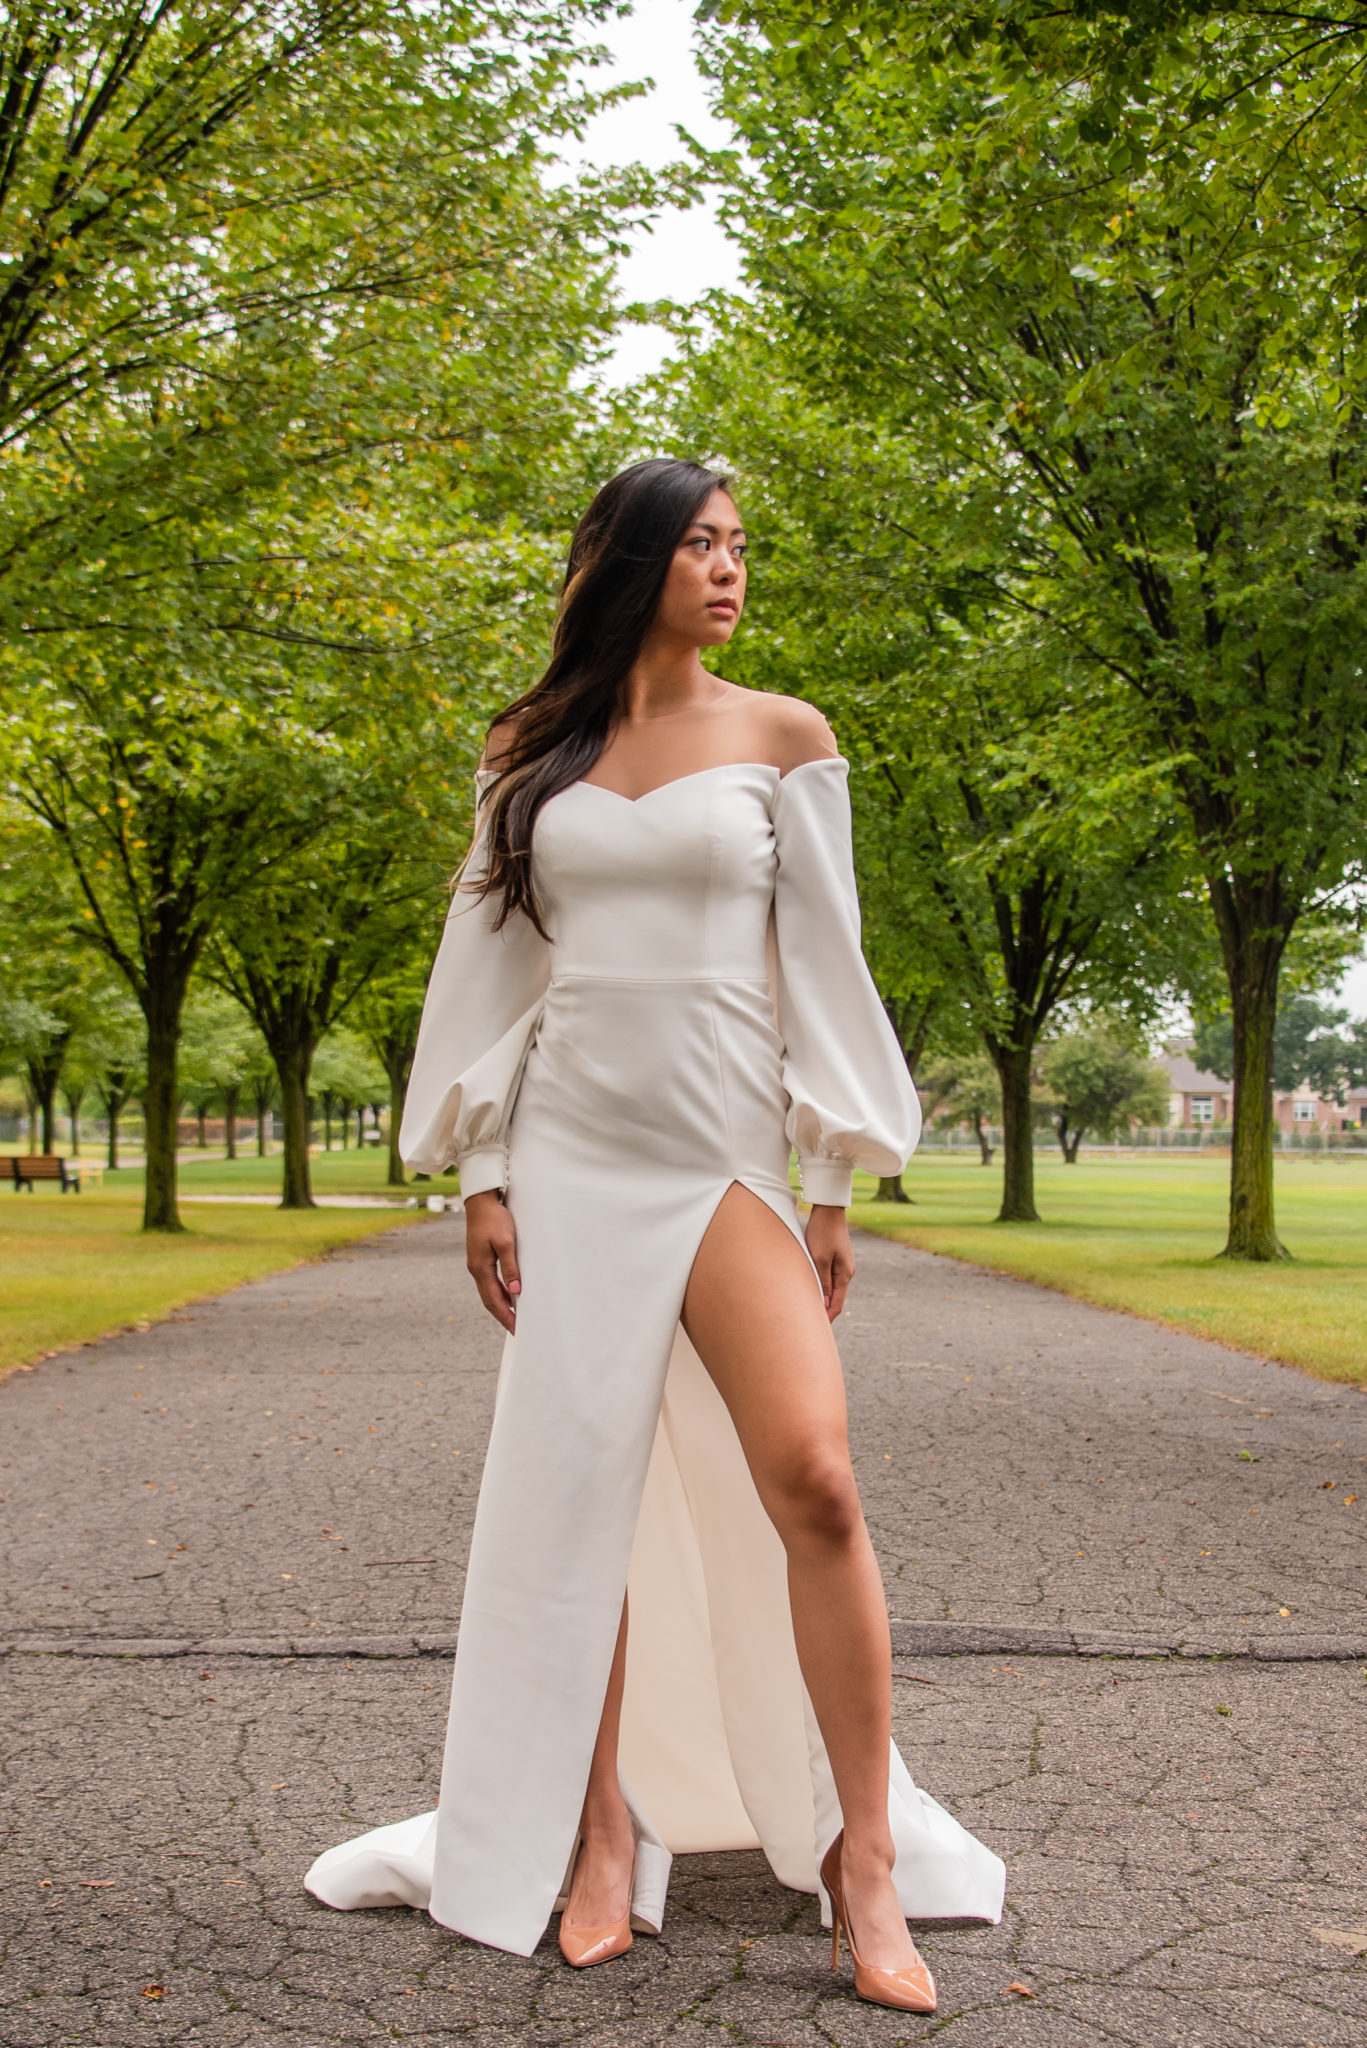 woman in 80s style puffy wedding dress with leg slit